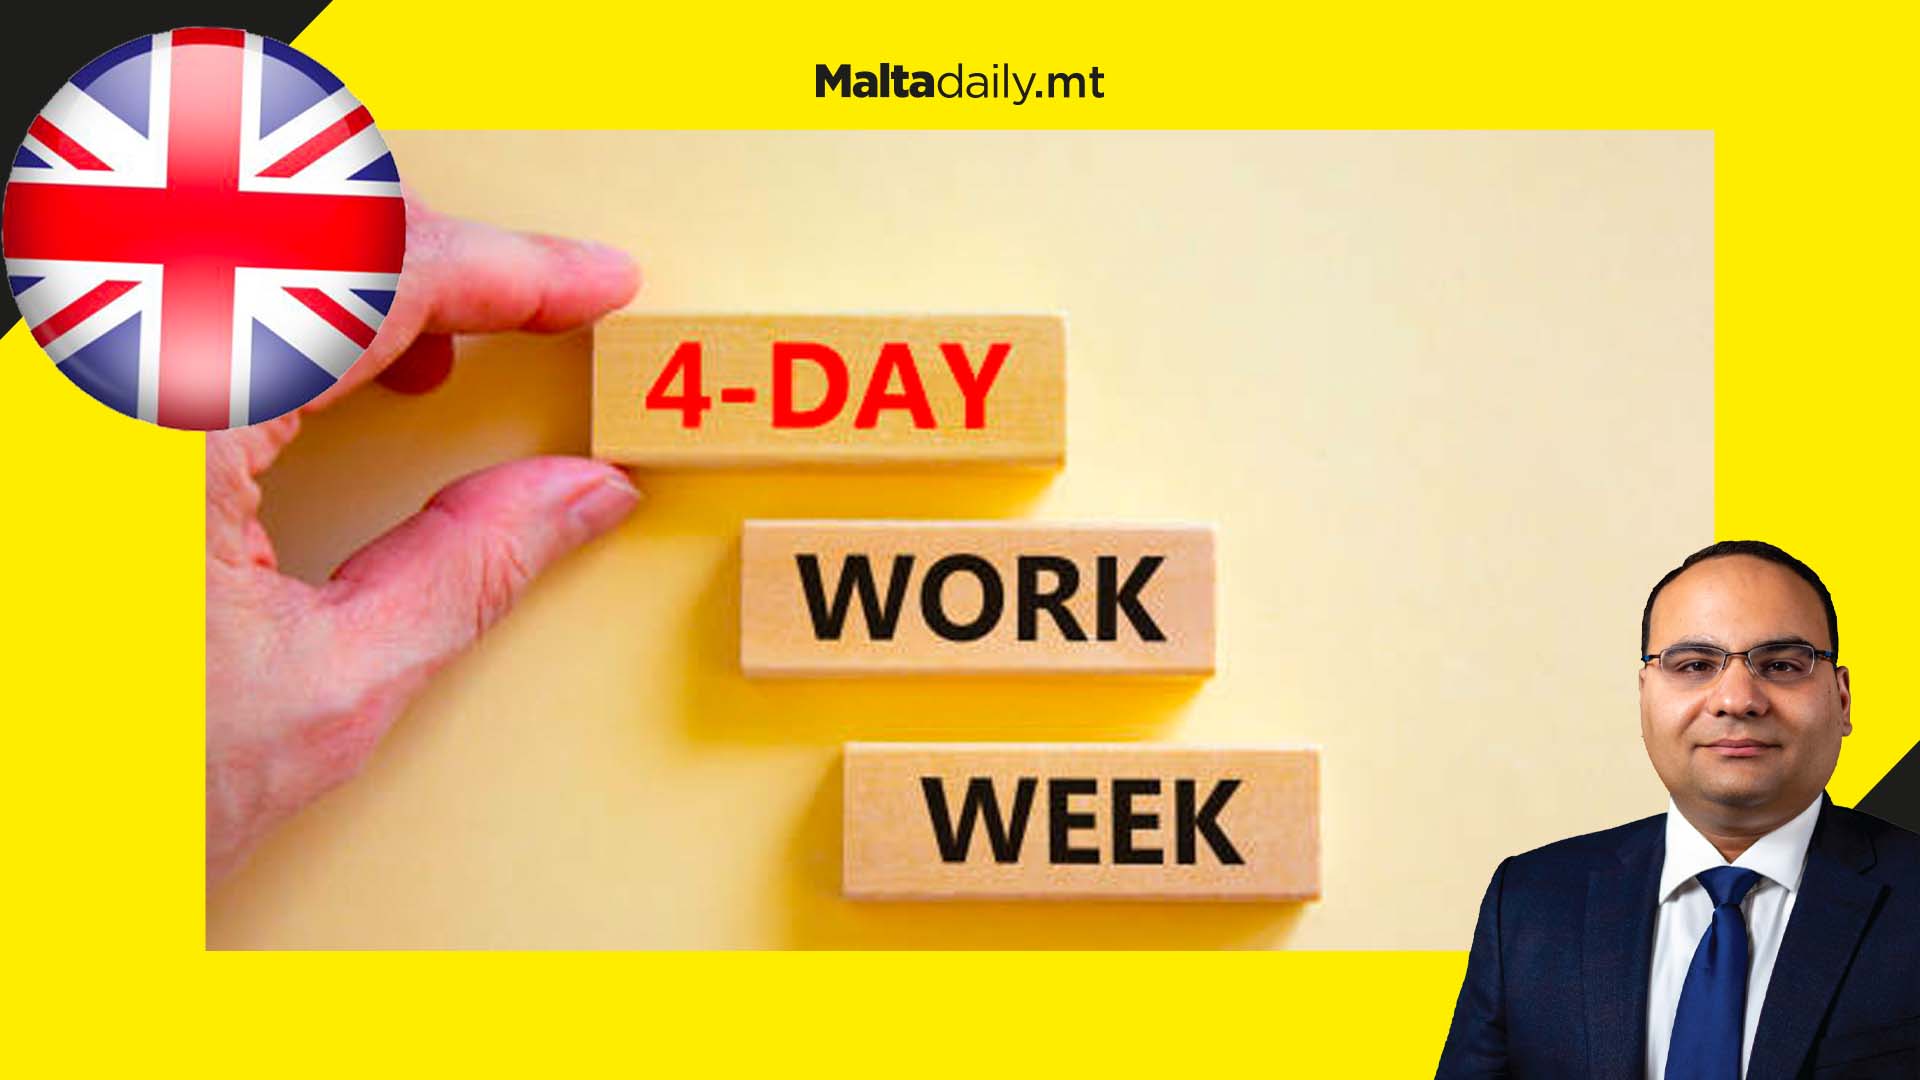 Many UK companies trialing 4 day work week next month… Malta still not ready